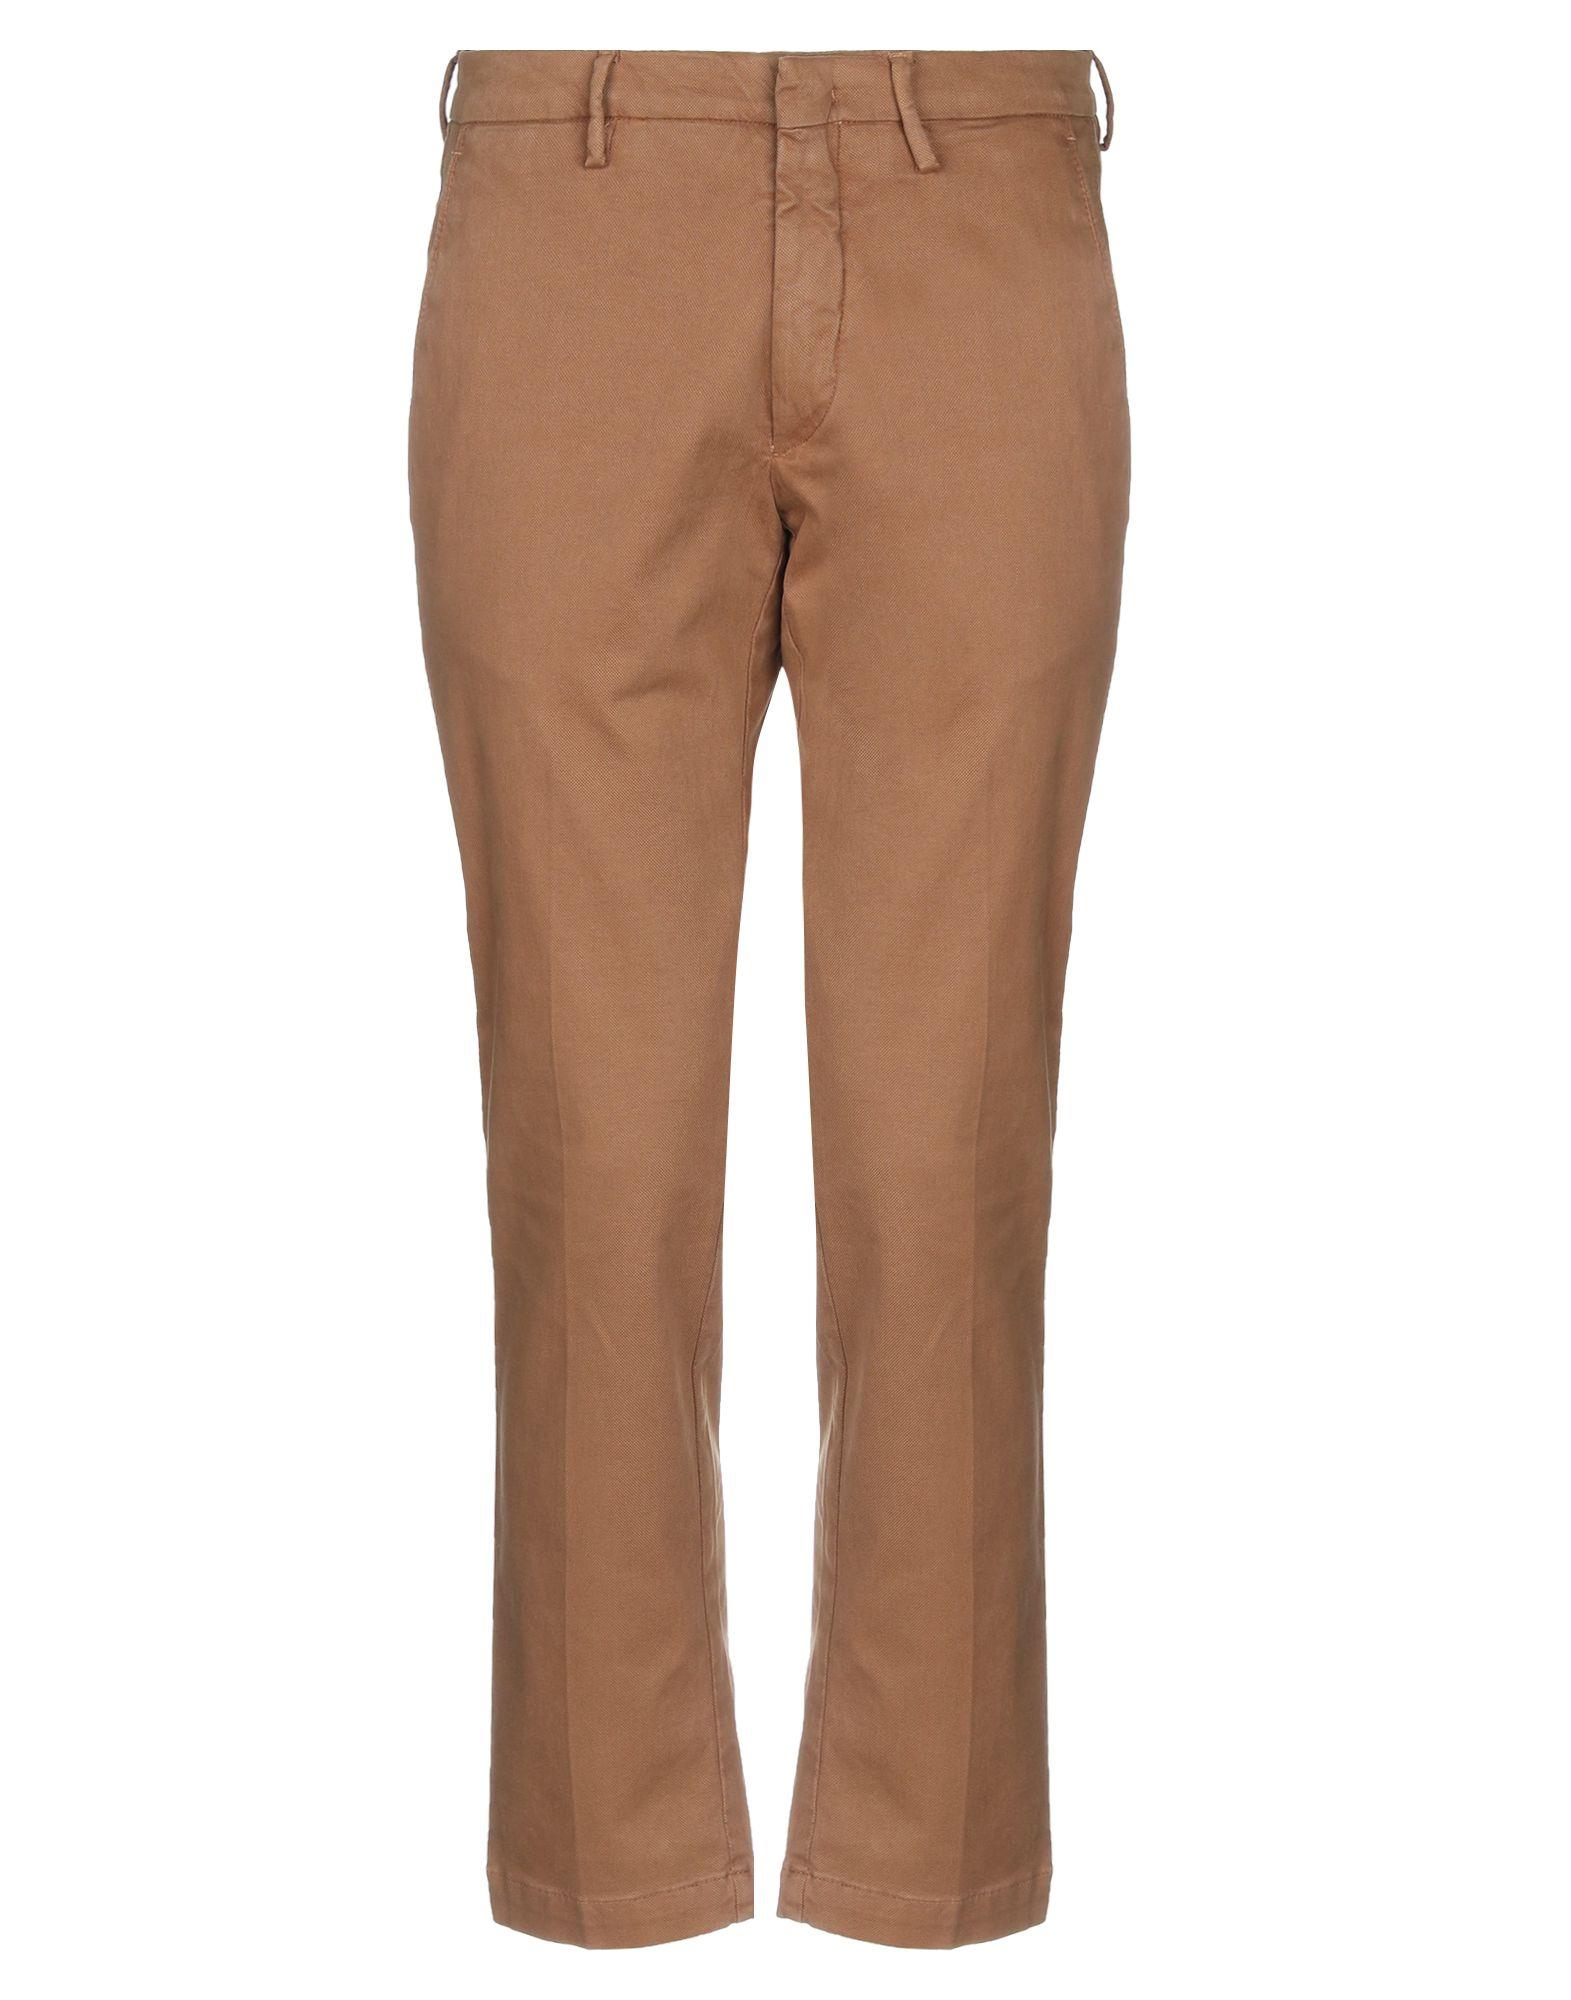 Michael Coal Cotton Casual Trouser in Brown for Men - Lyst